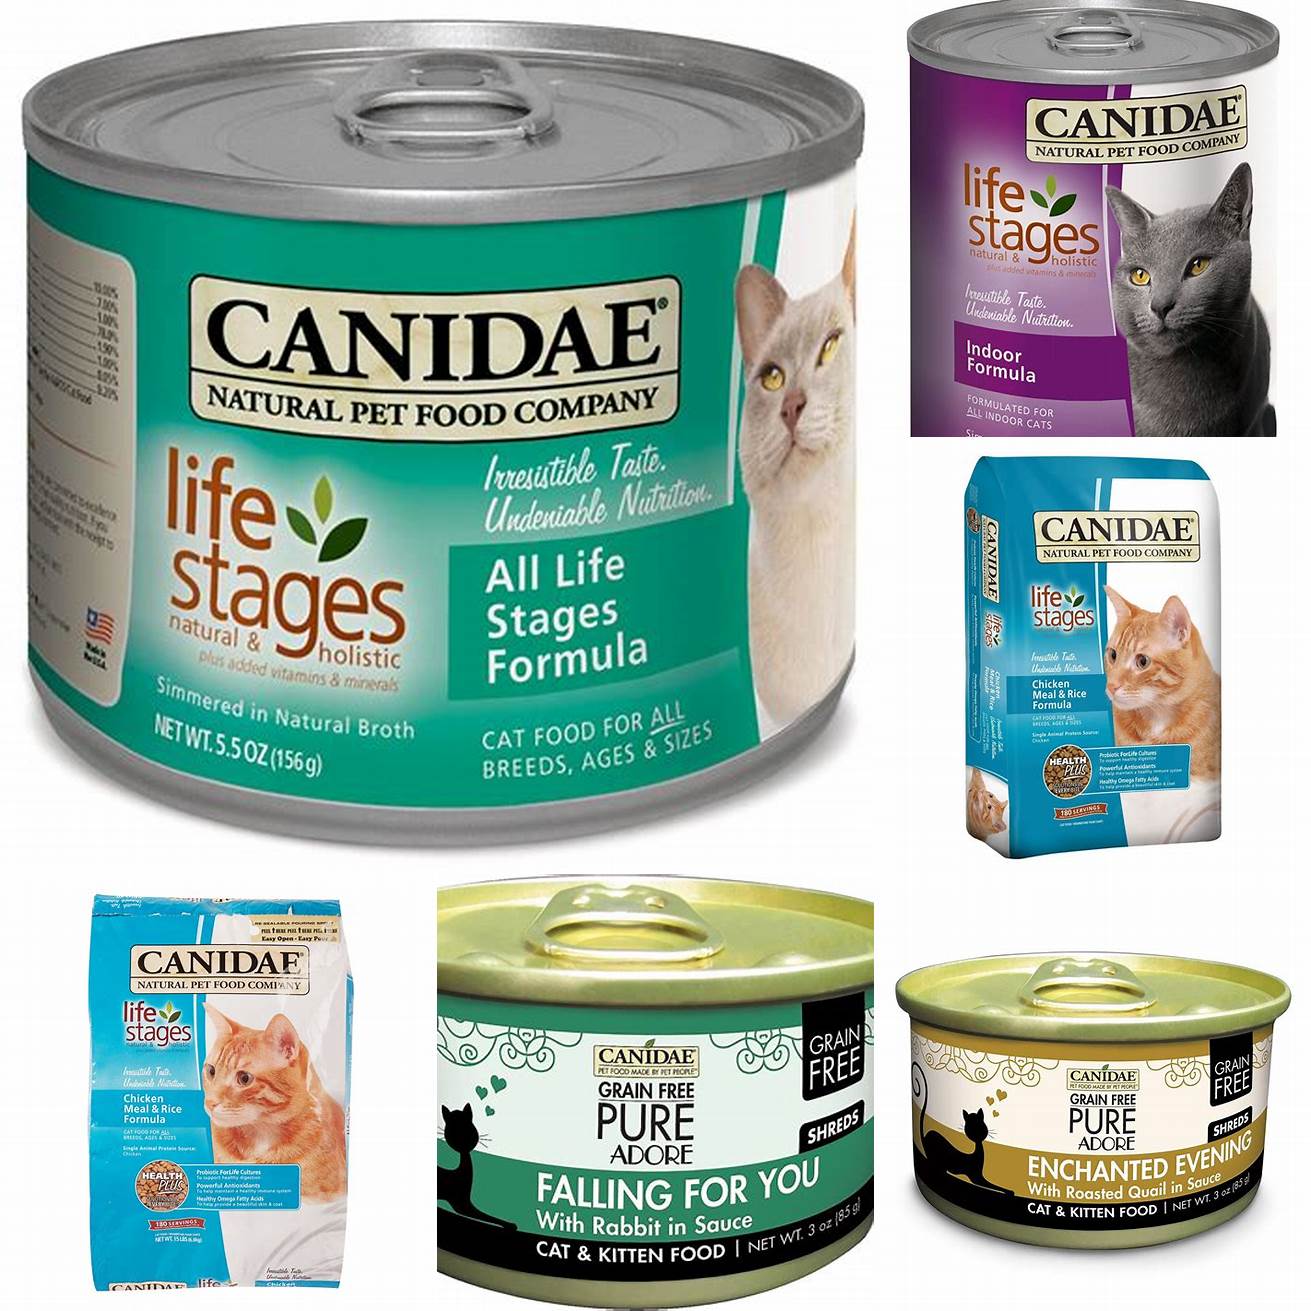 Canidae Wet Cat Food is made with natural ingredients that are free from harmful chemicals and additives